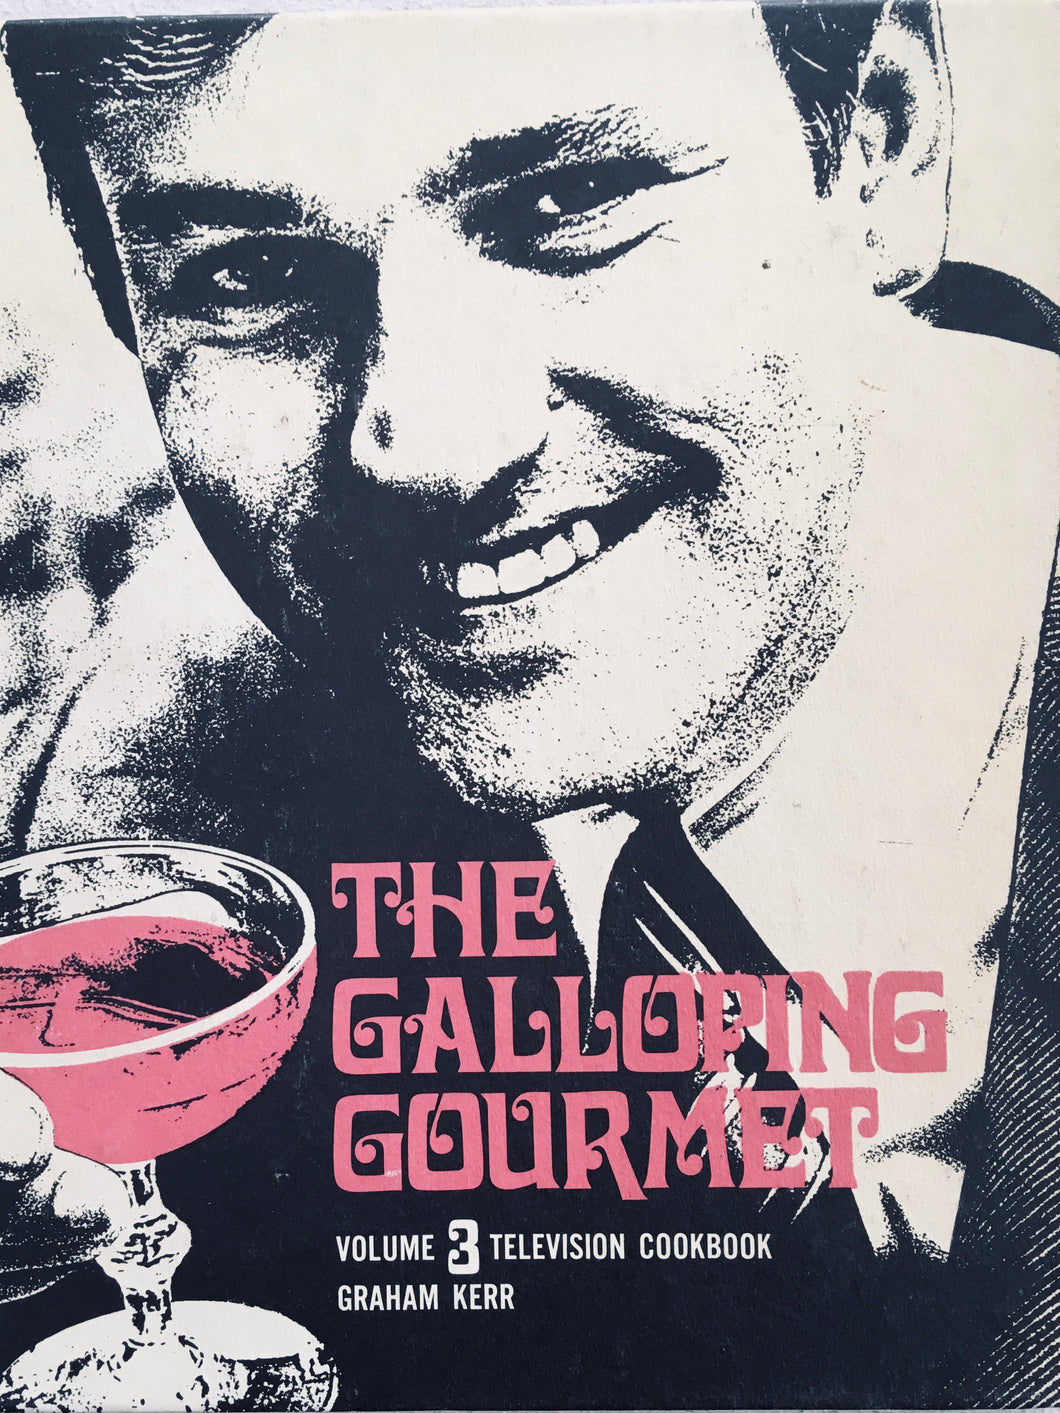 The Galloping Gourmet Television Cookbook Vol 3 by Graham Kerr